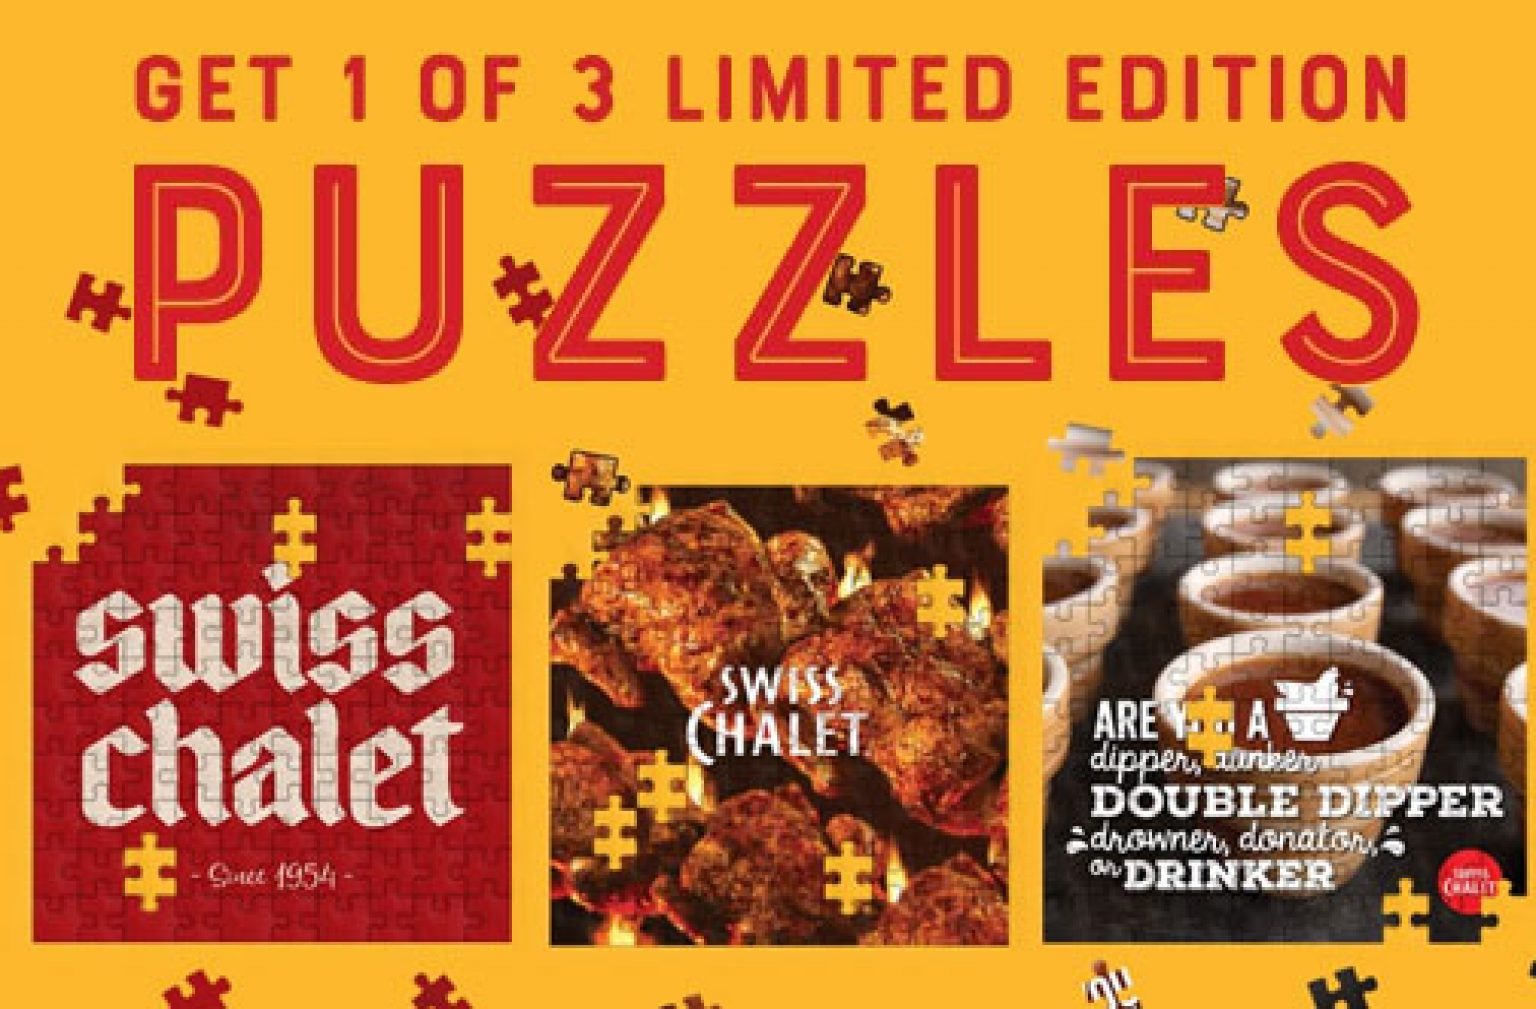 Swiss Chalet Coupons & Offers 2021 | Puzzles are Back + NEW Crispy